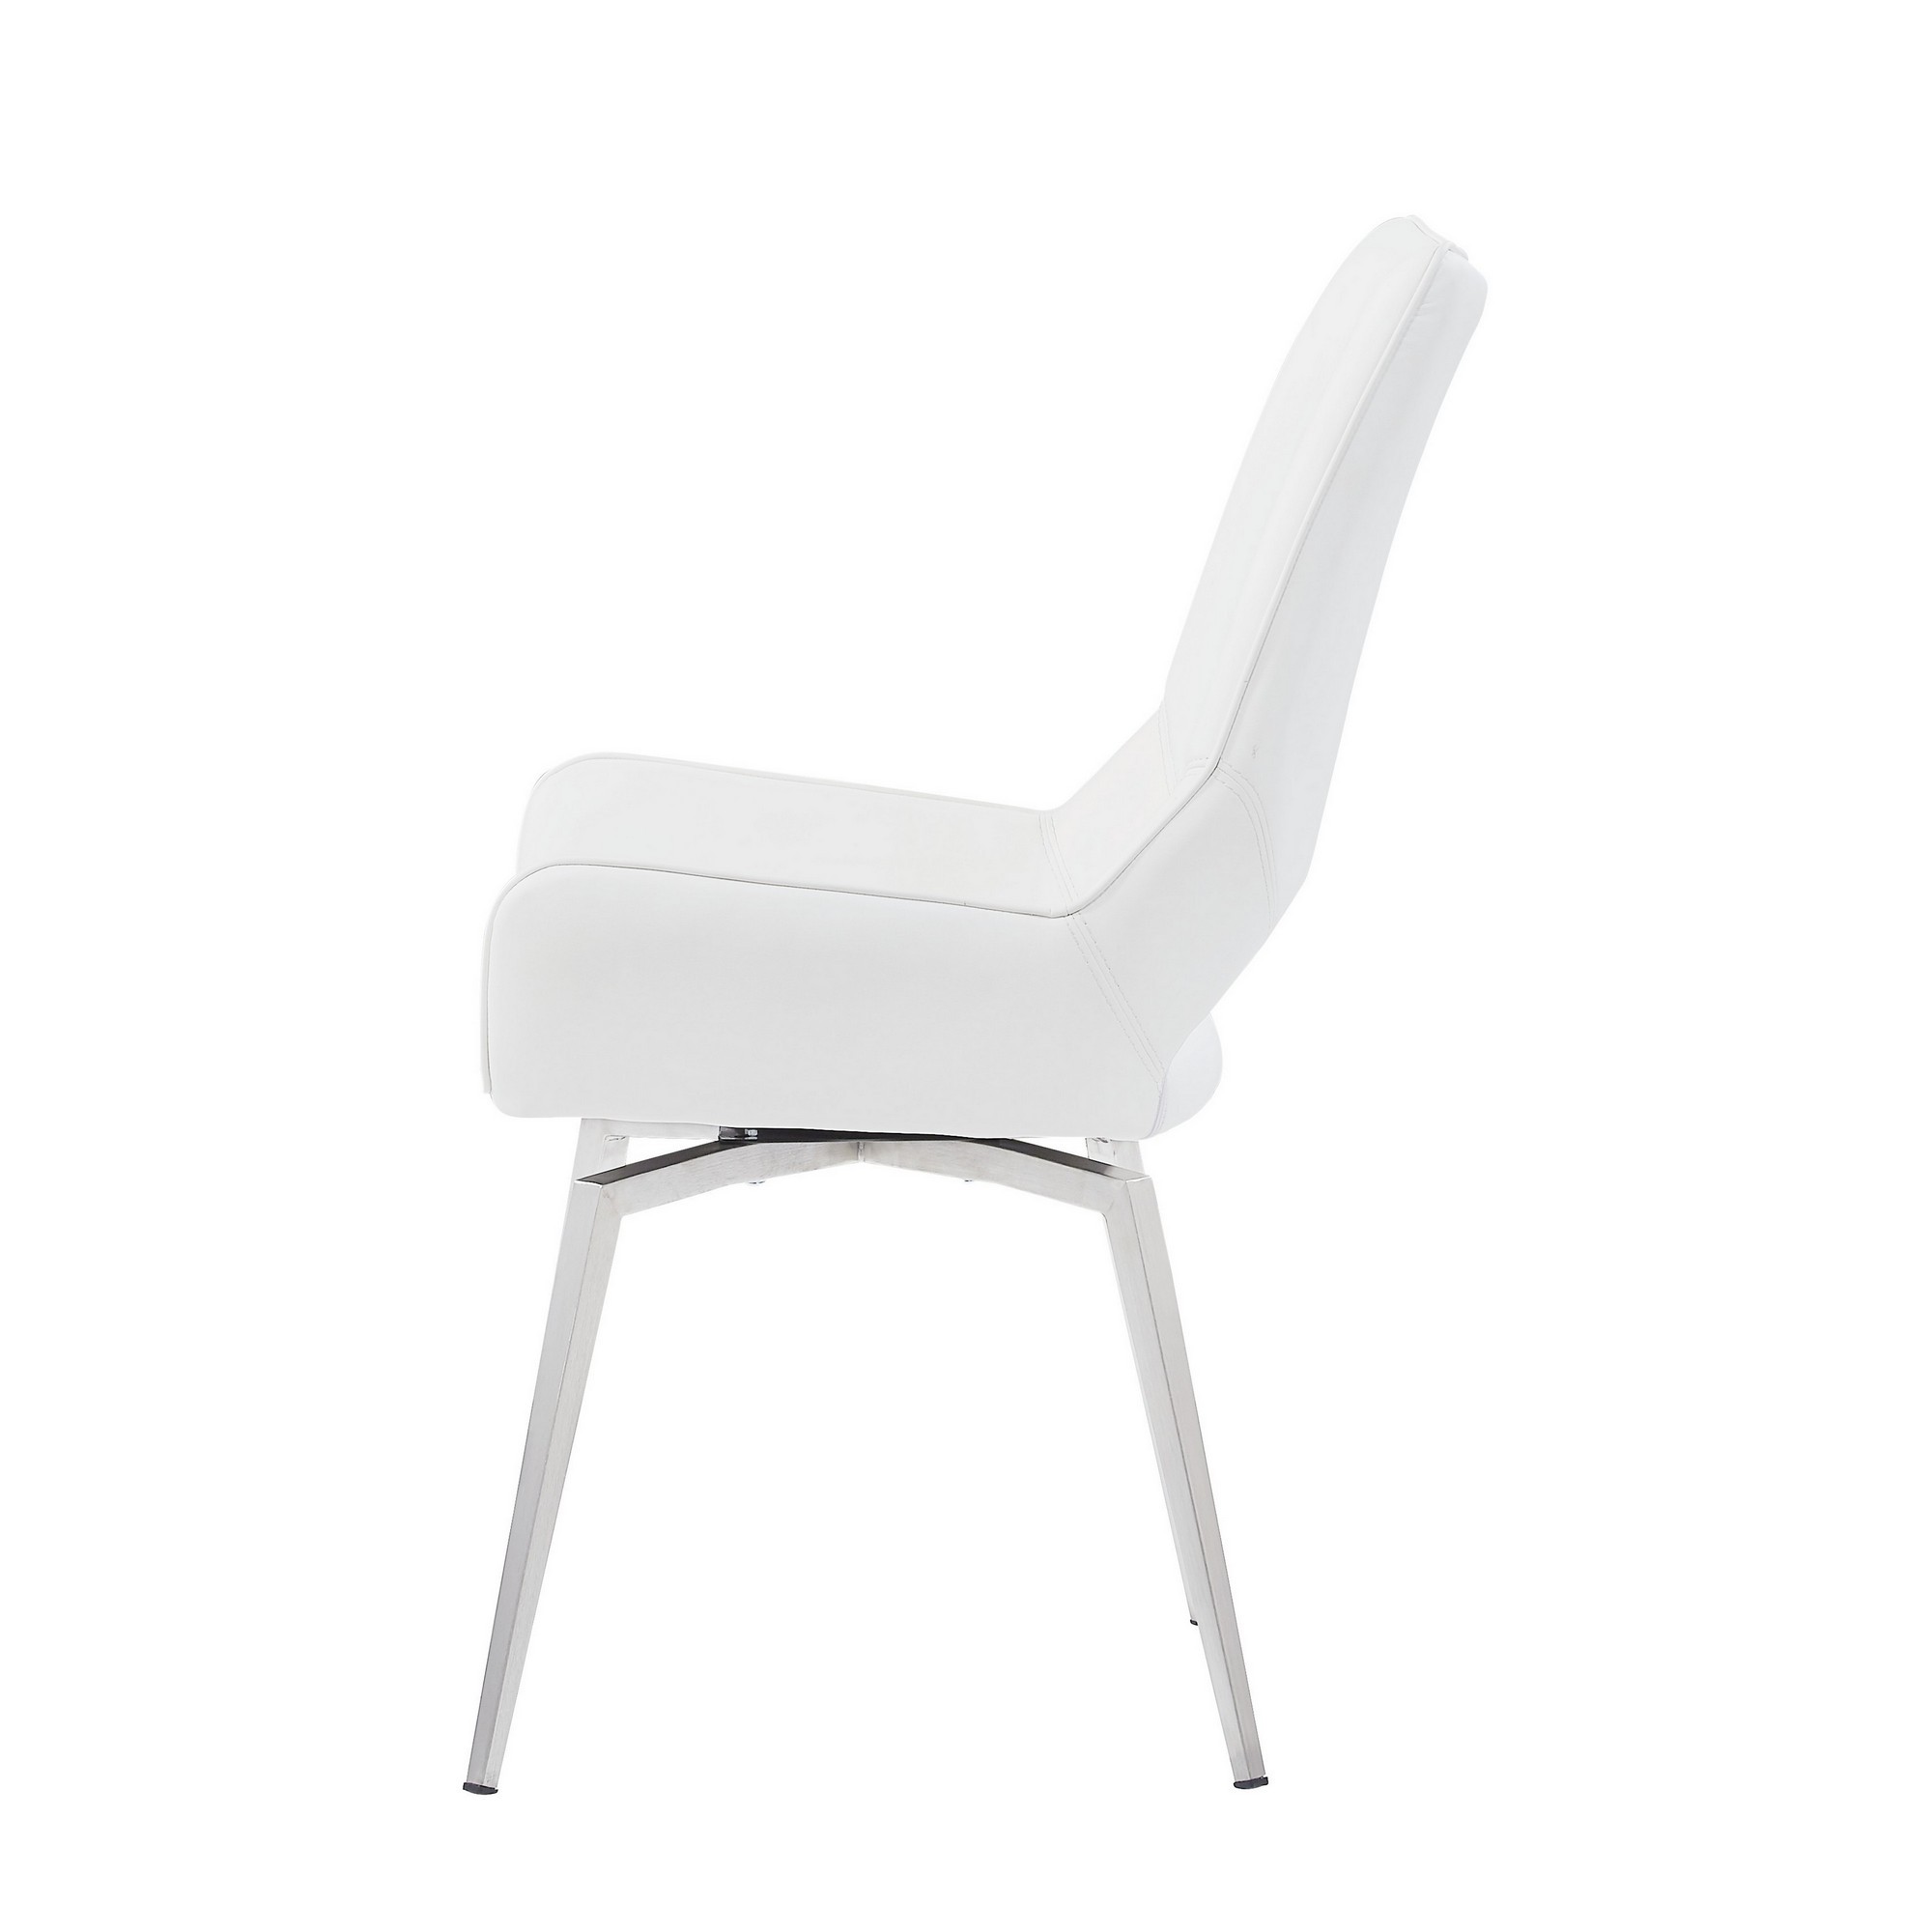 Set of 2 White Bucket Style Dining Chairs with Metalic Silver Base